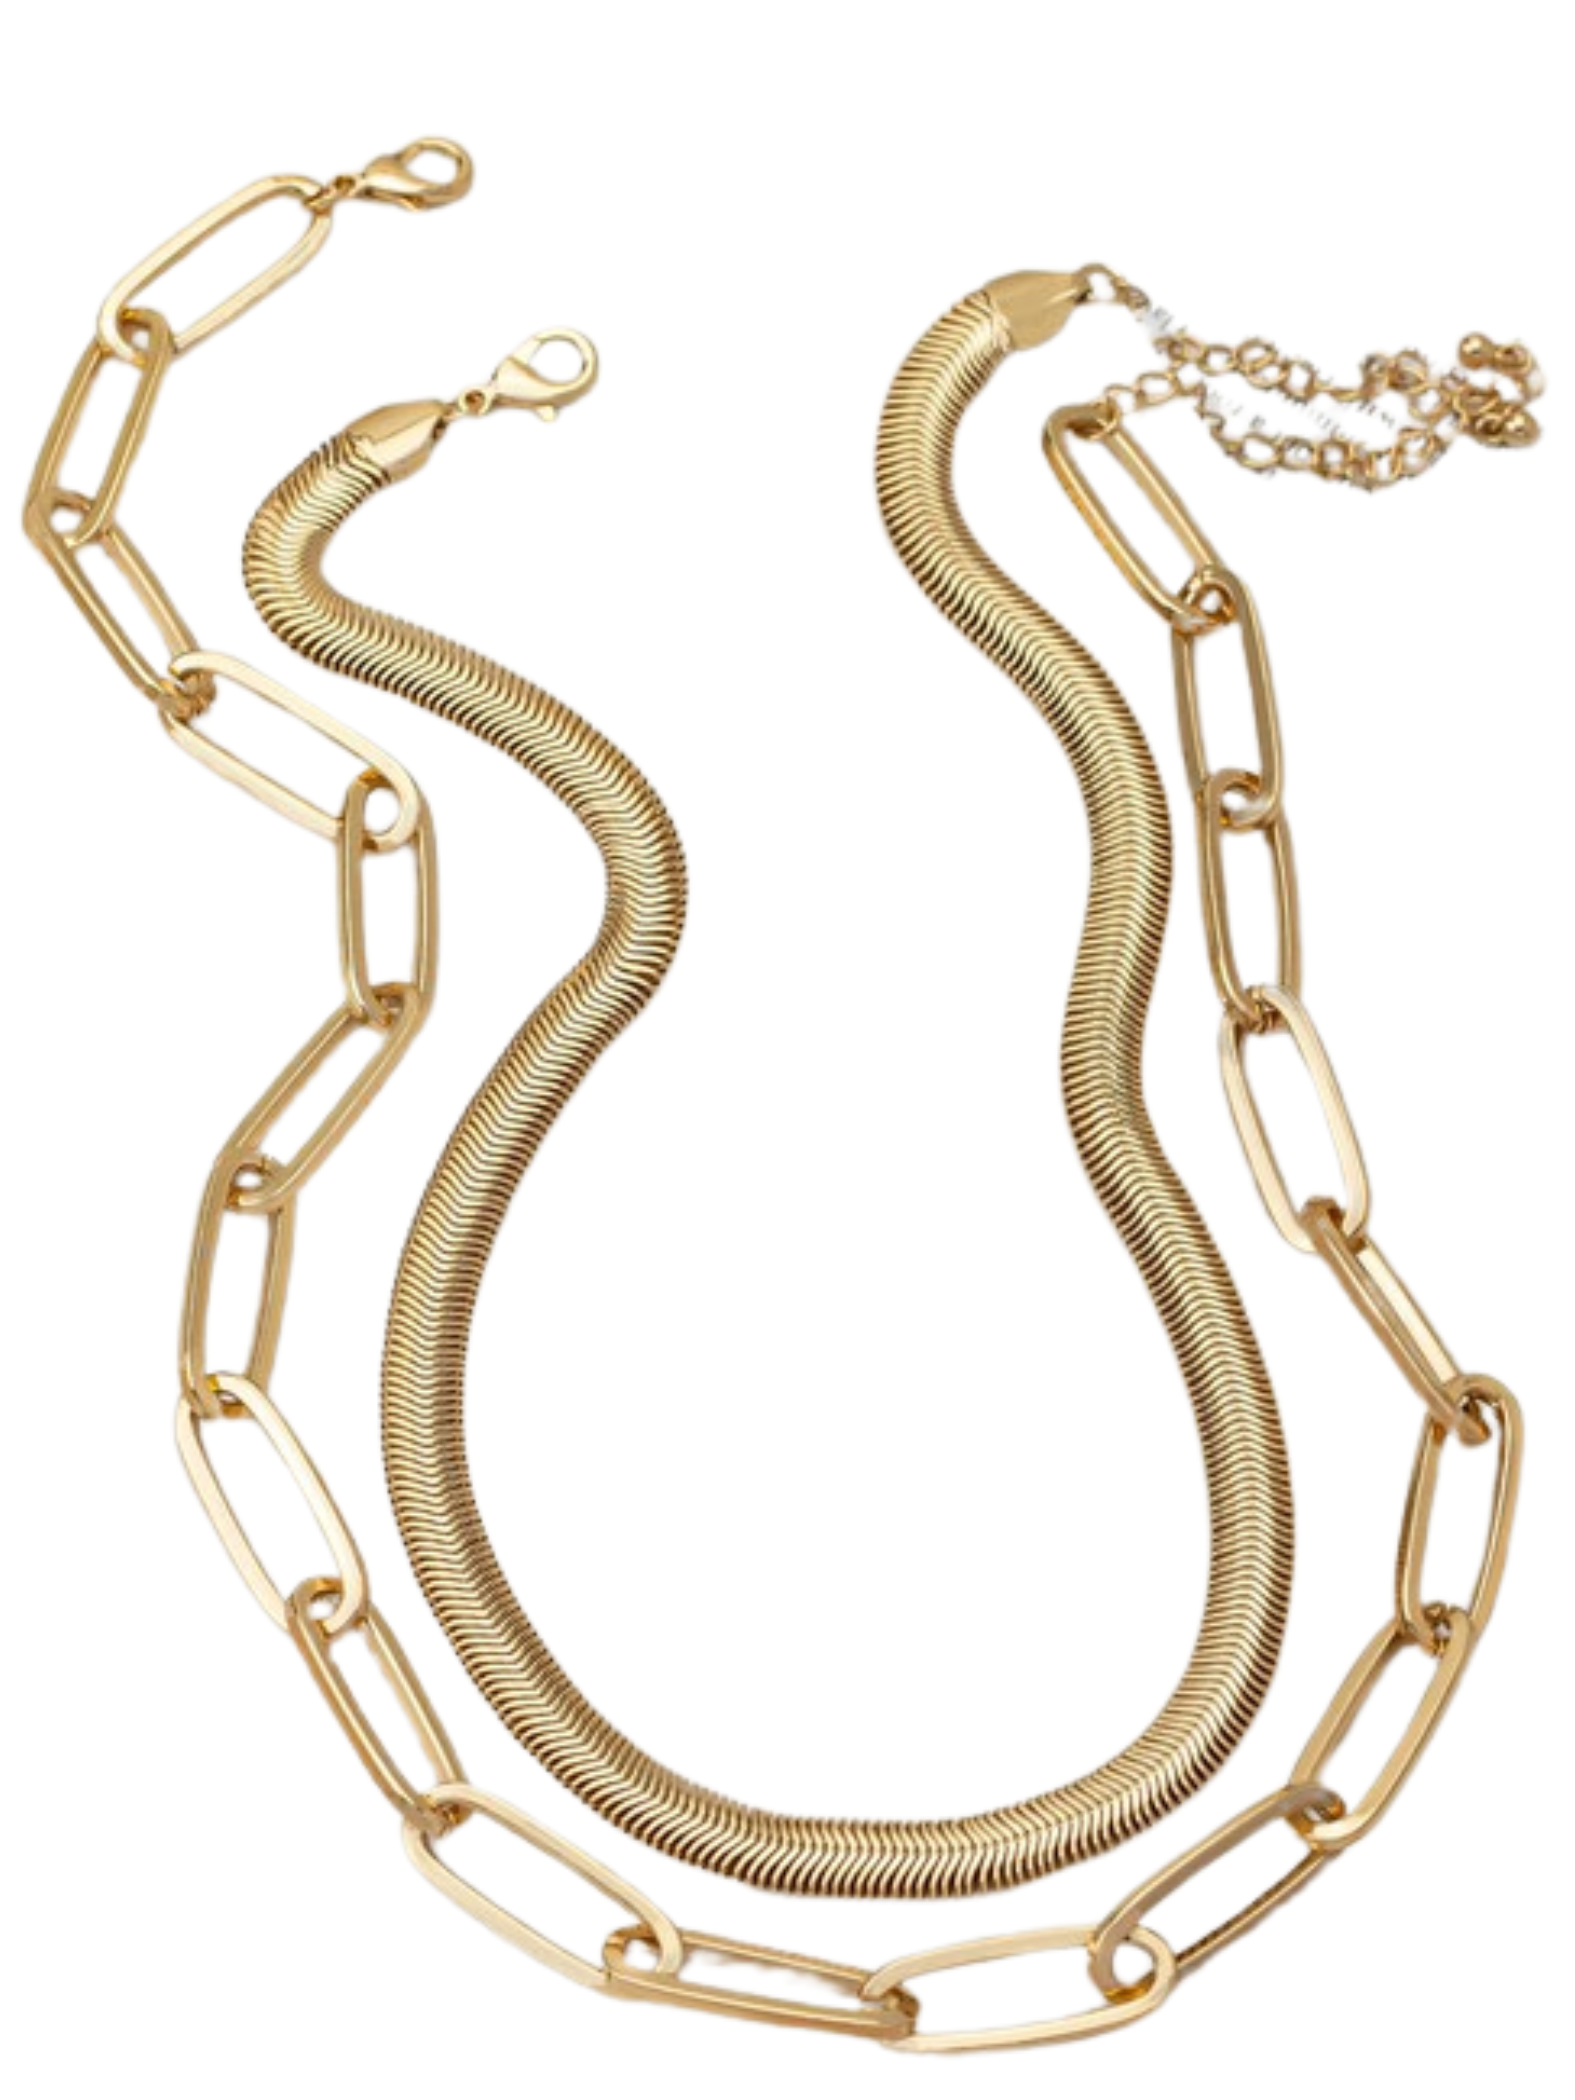 GOLD HERRINGBONE AND CHUNKY LINK CHAIN NECKLACE SET